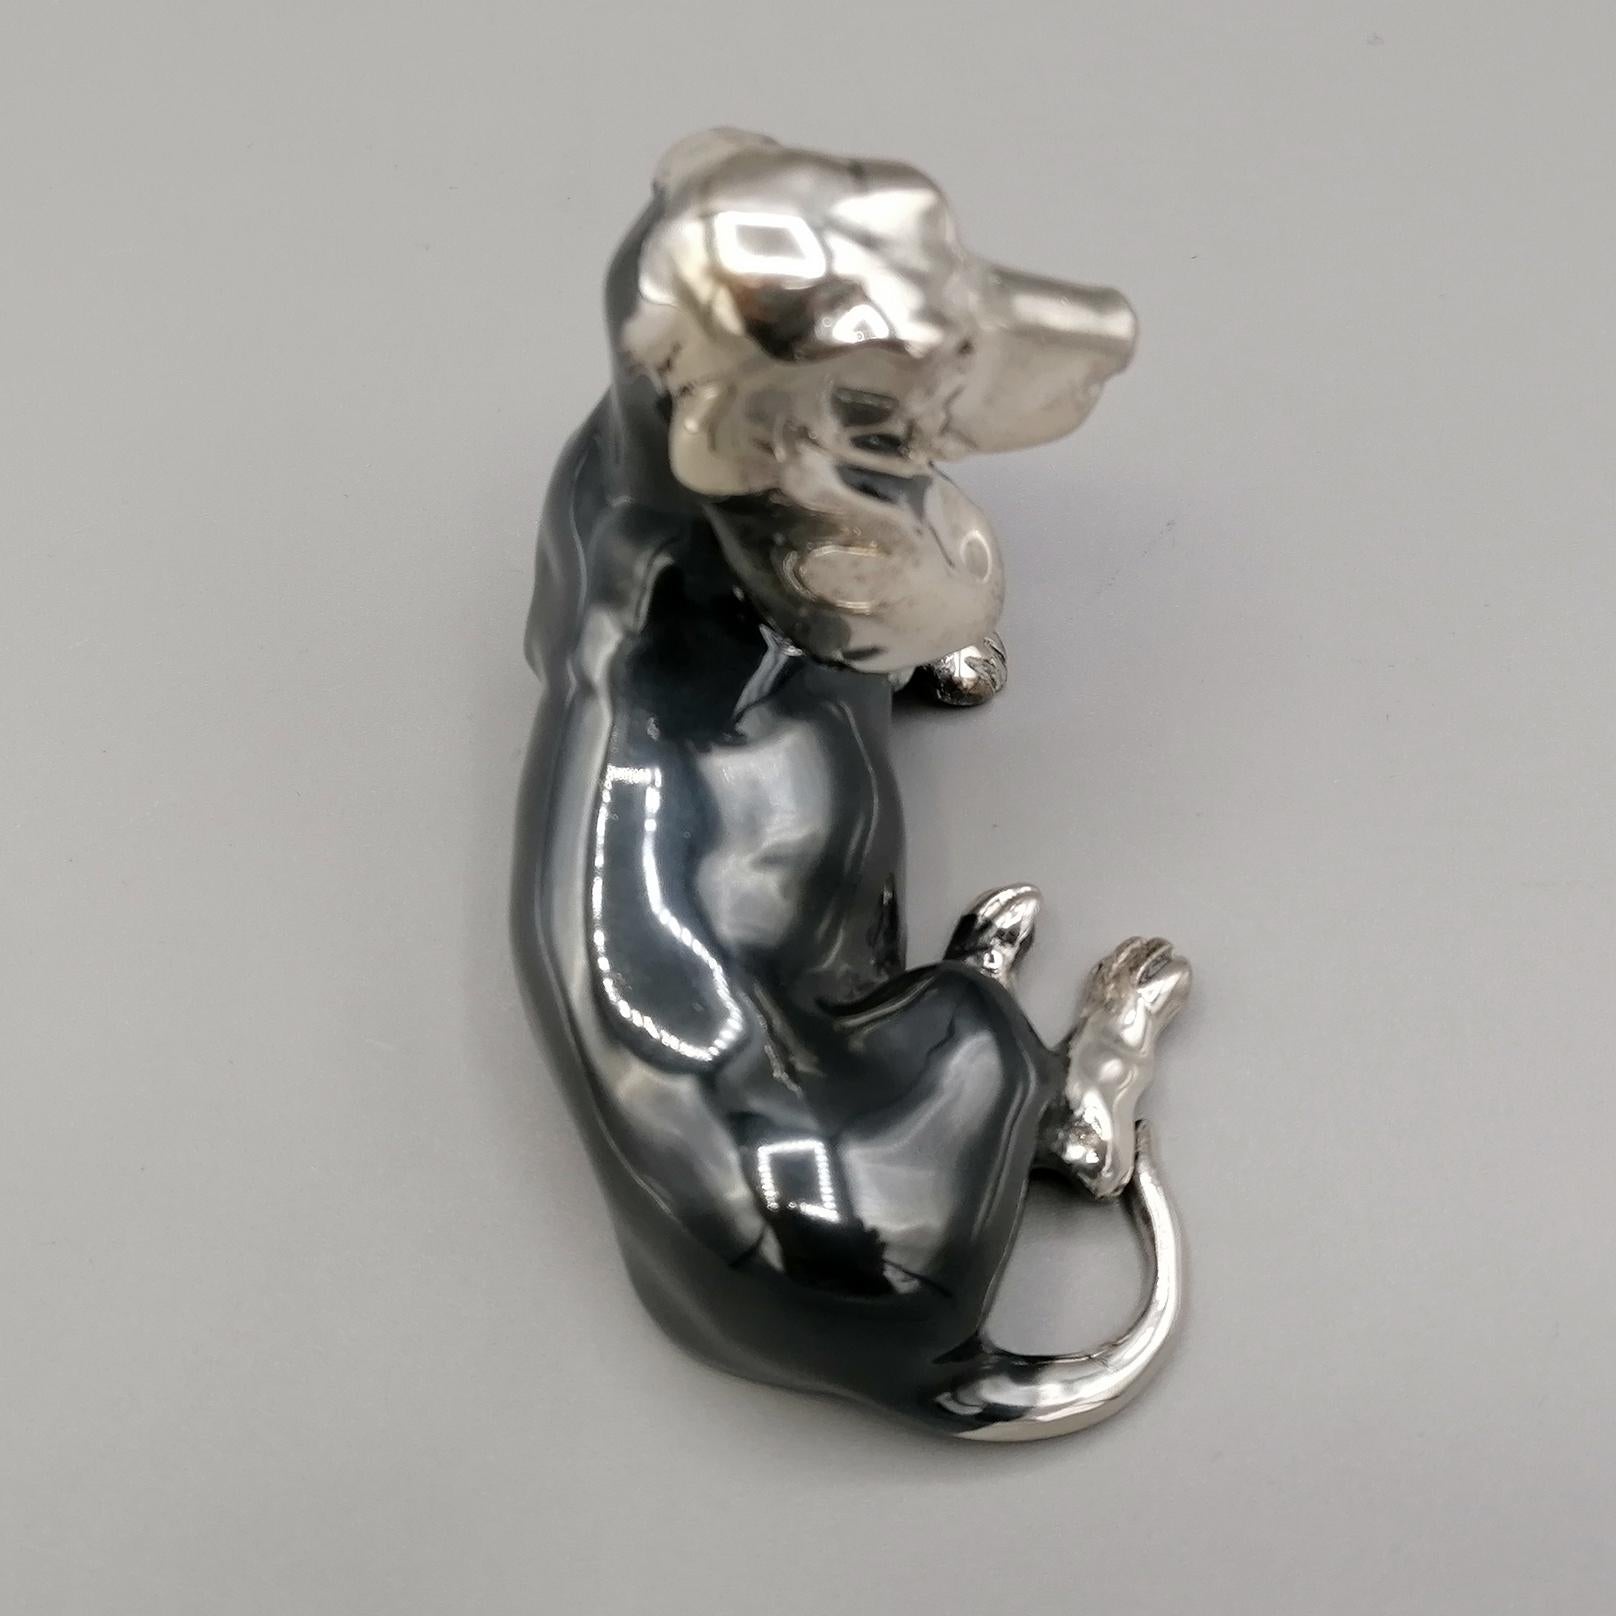 Late 20th Century 20th Century Solid Silver Sculture Depicting a Basset Hound Dog For Sale